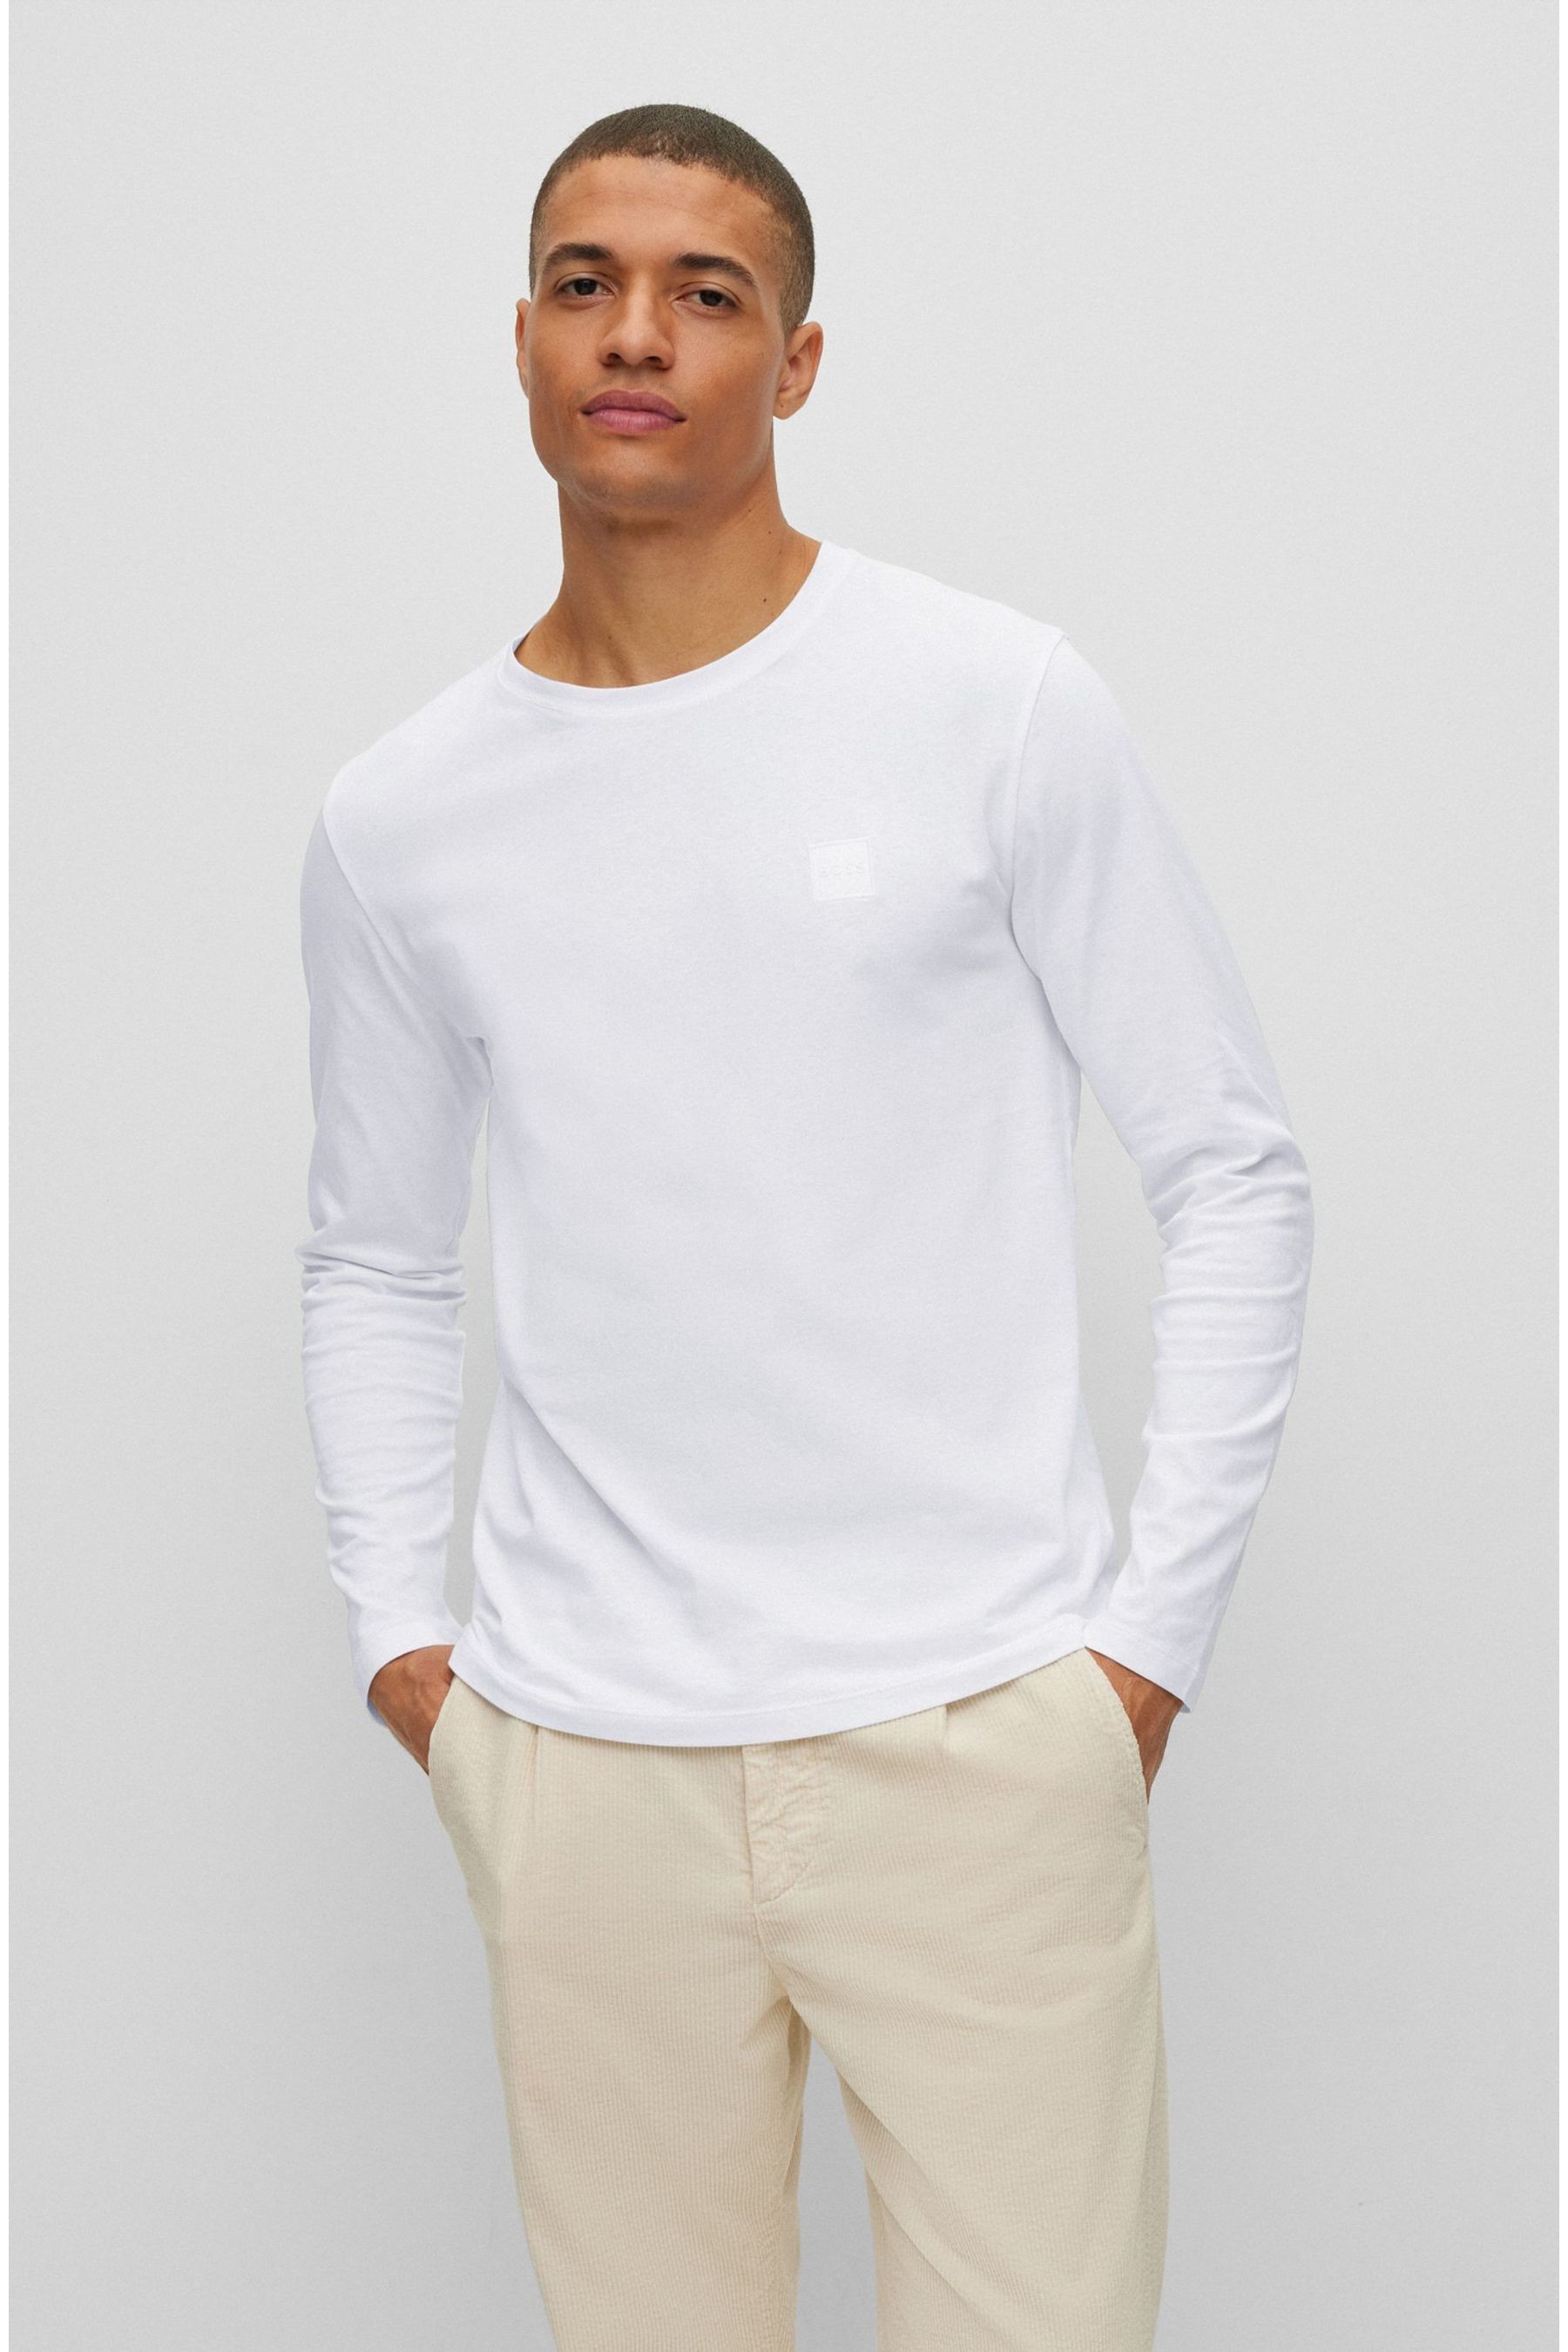 Buy BOSS White Tacks Long Sleeve T-Shirt from the Next UK online shop